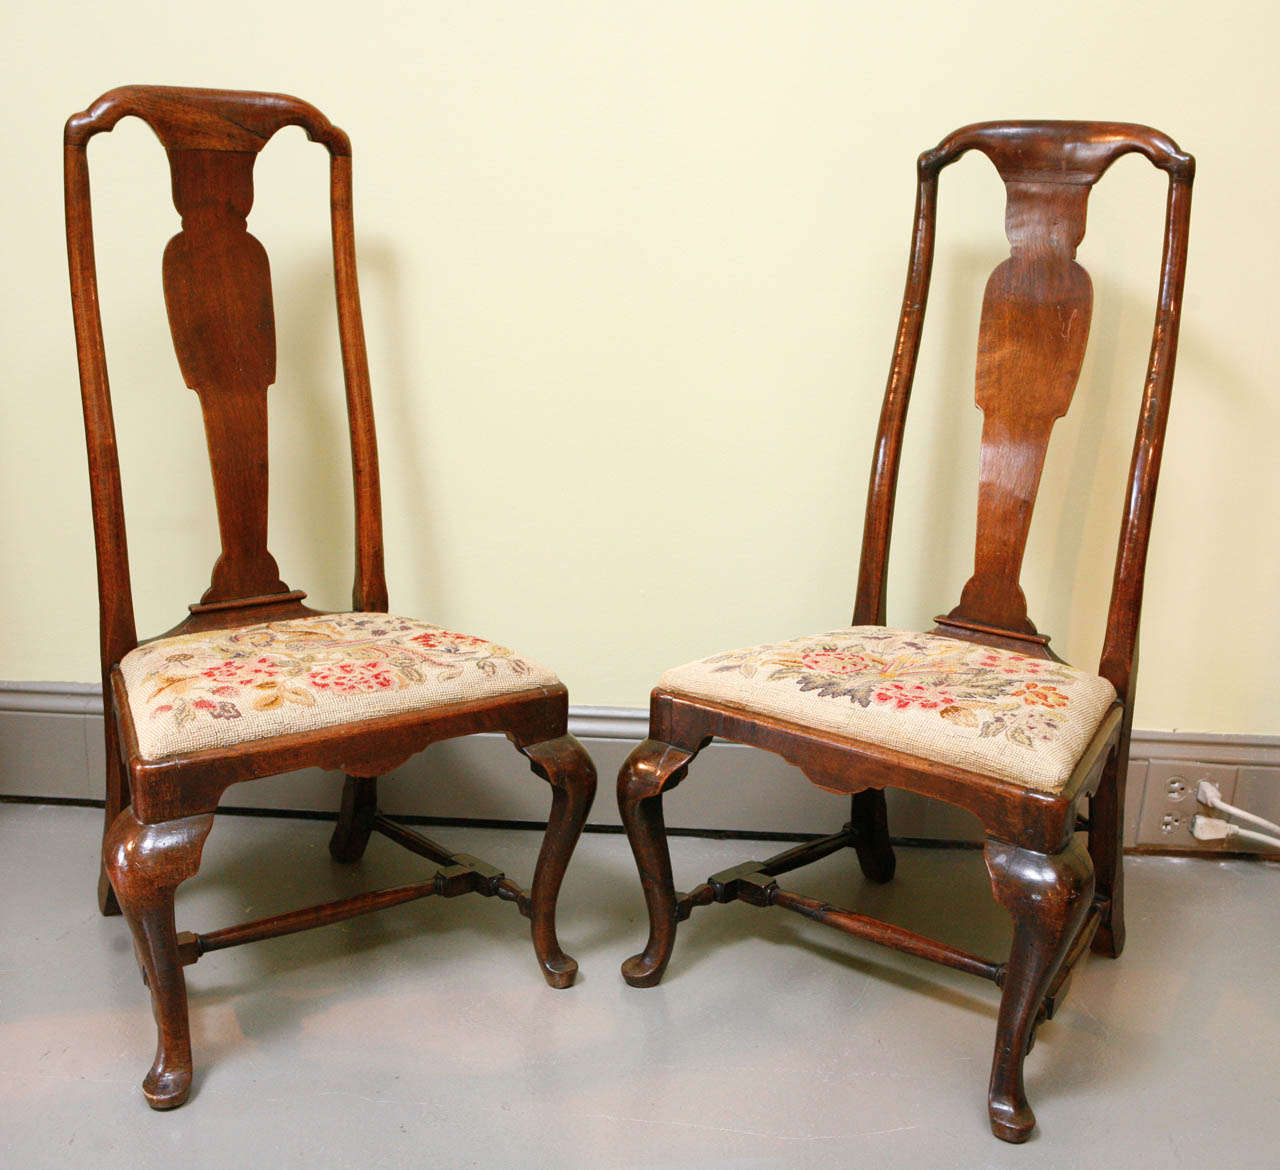 A Pair of English Queen Anne low hearthside chairs, mid 18th c. In walnut with needlework seats.  Very gracious proportions, incorporating cabriole legs, pad feet and vase-form back splat.